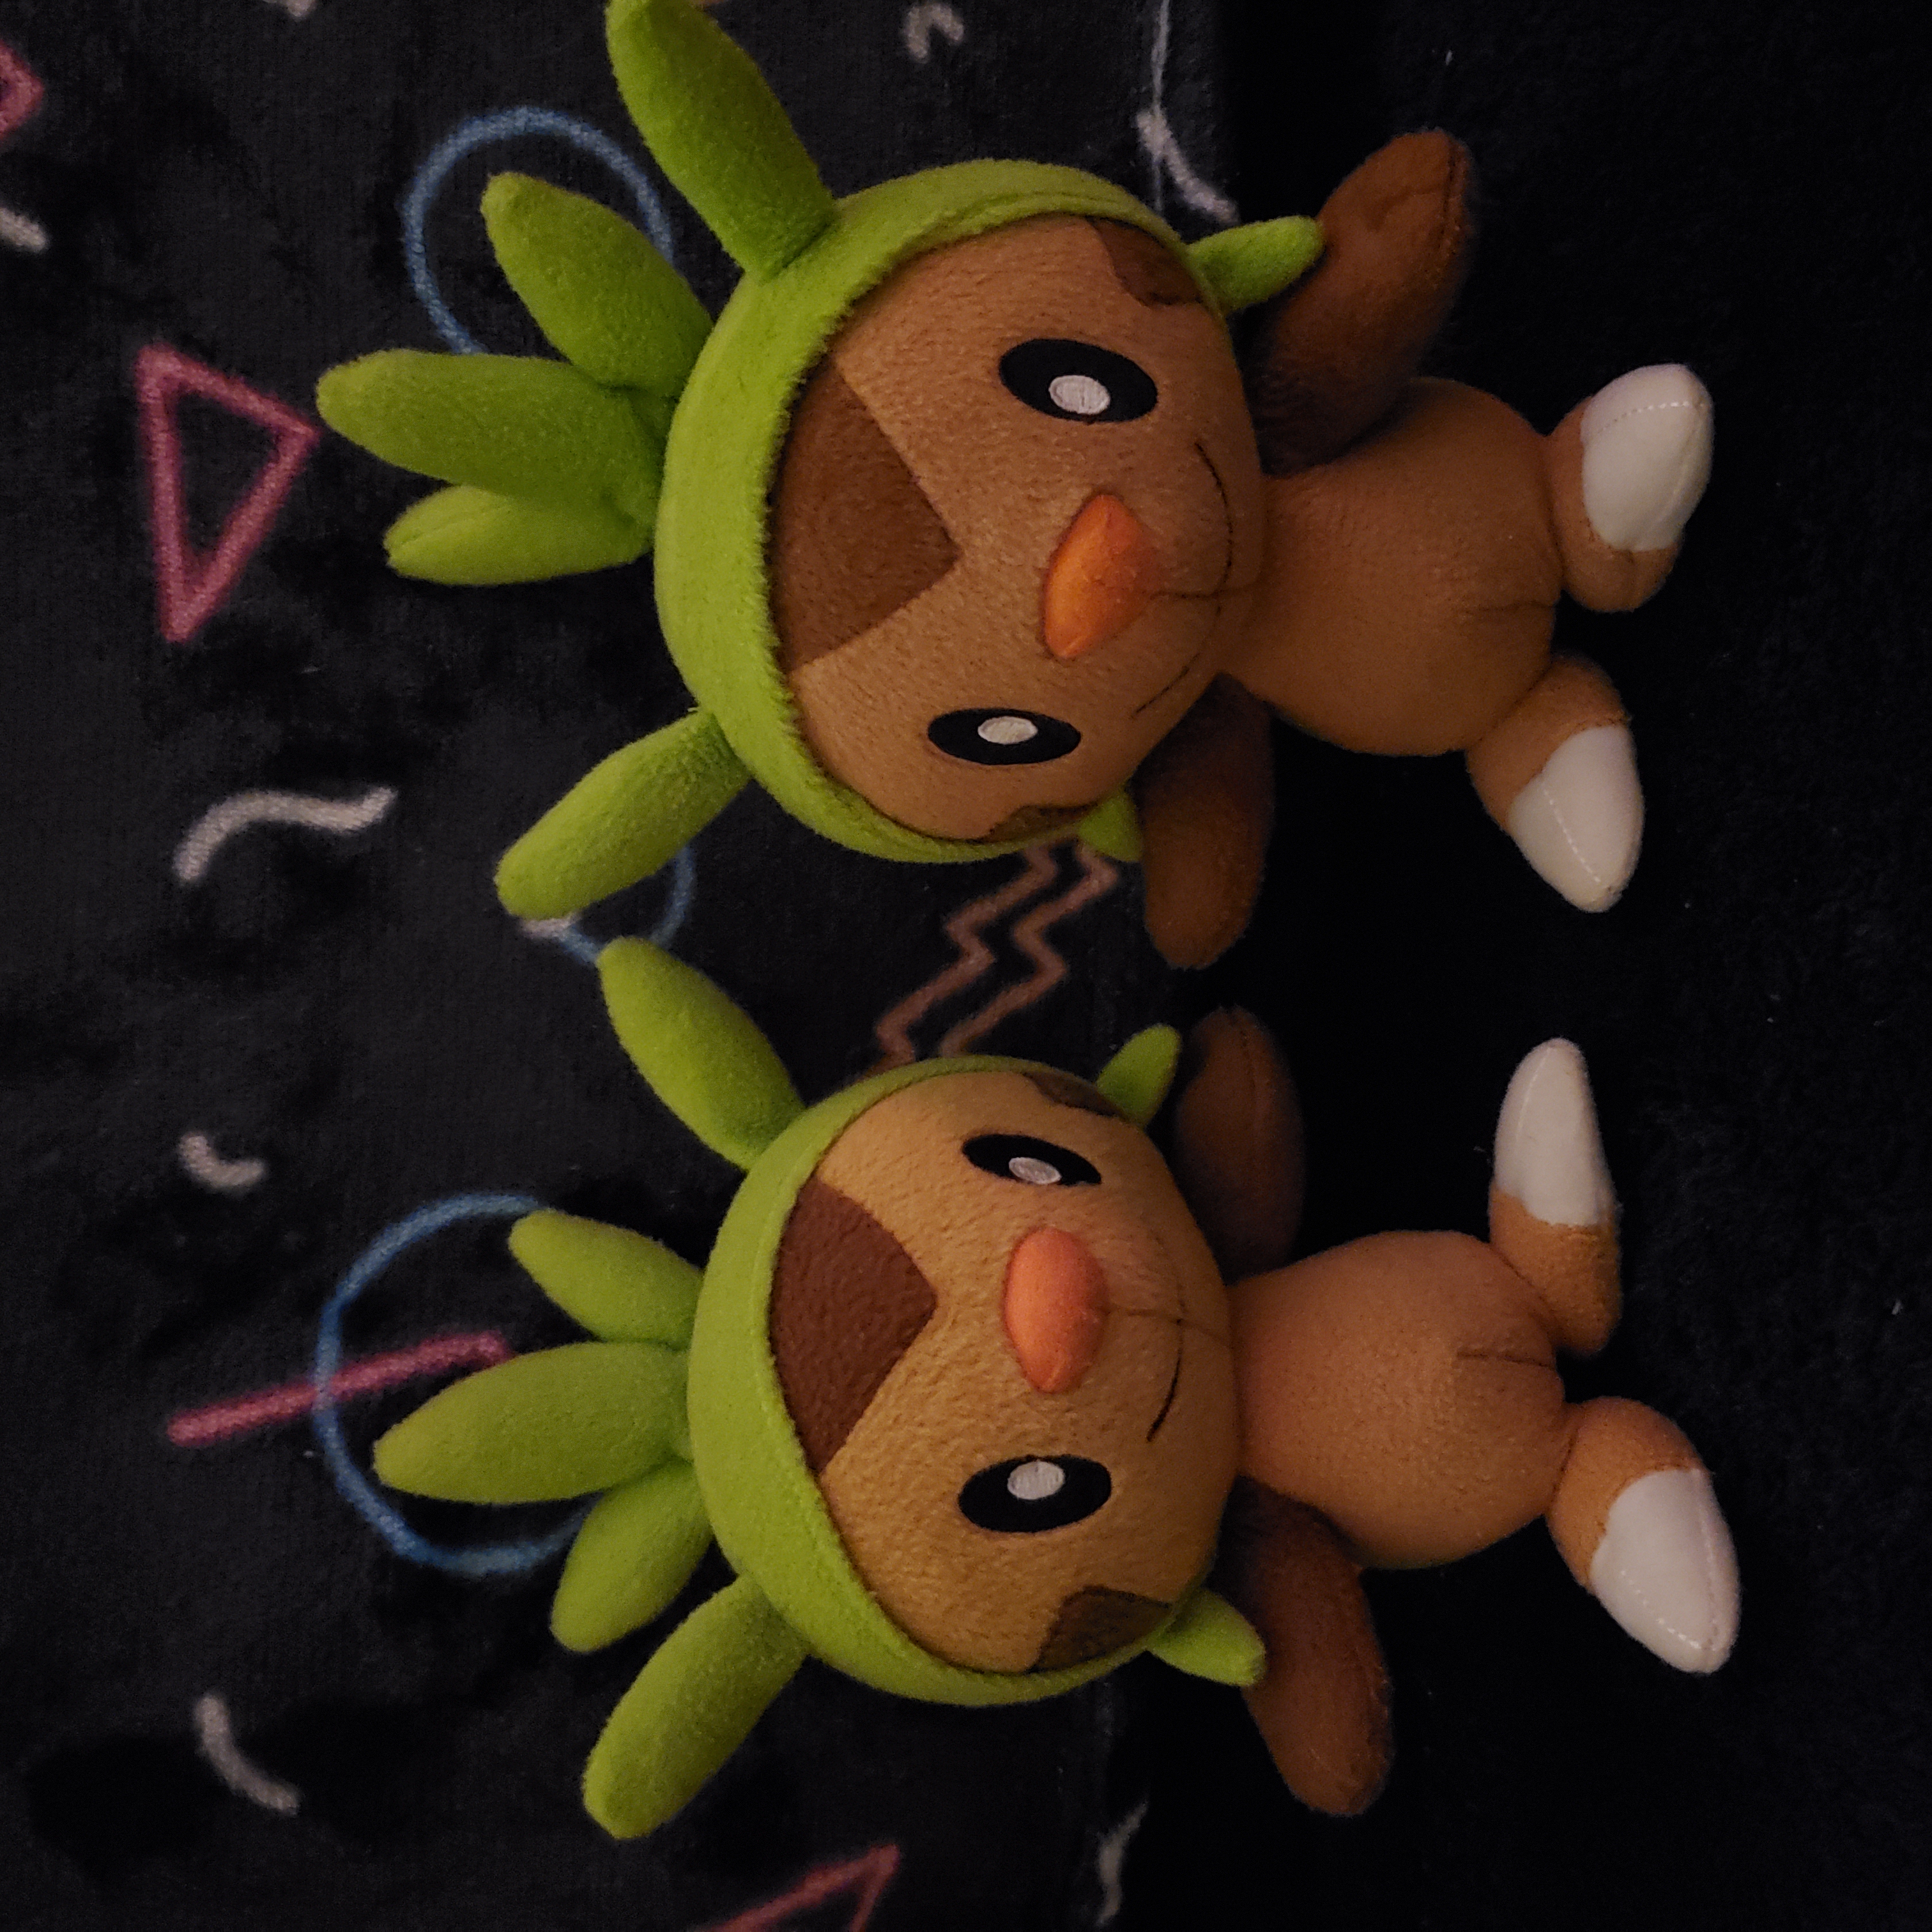 two chespin plush